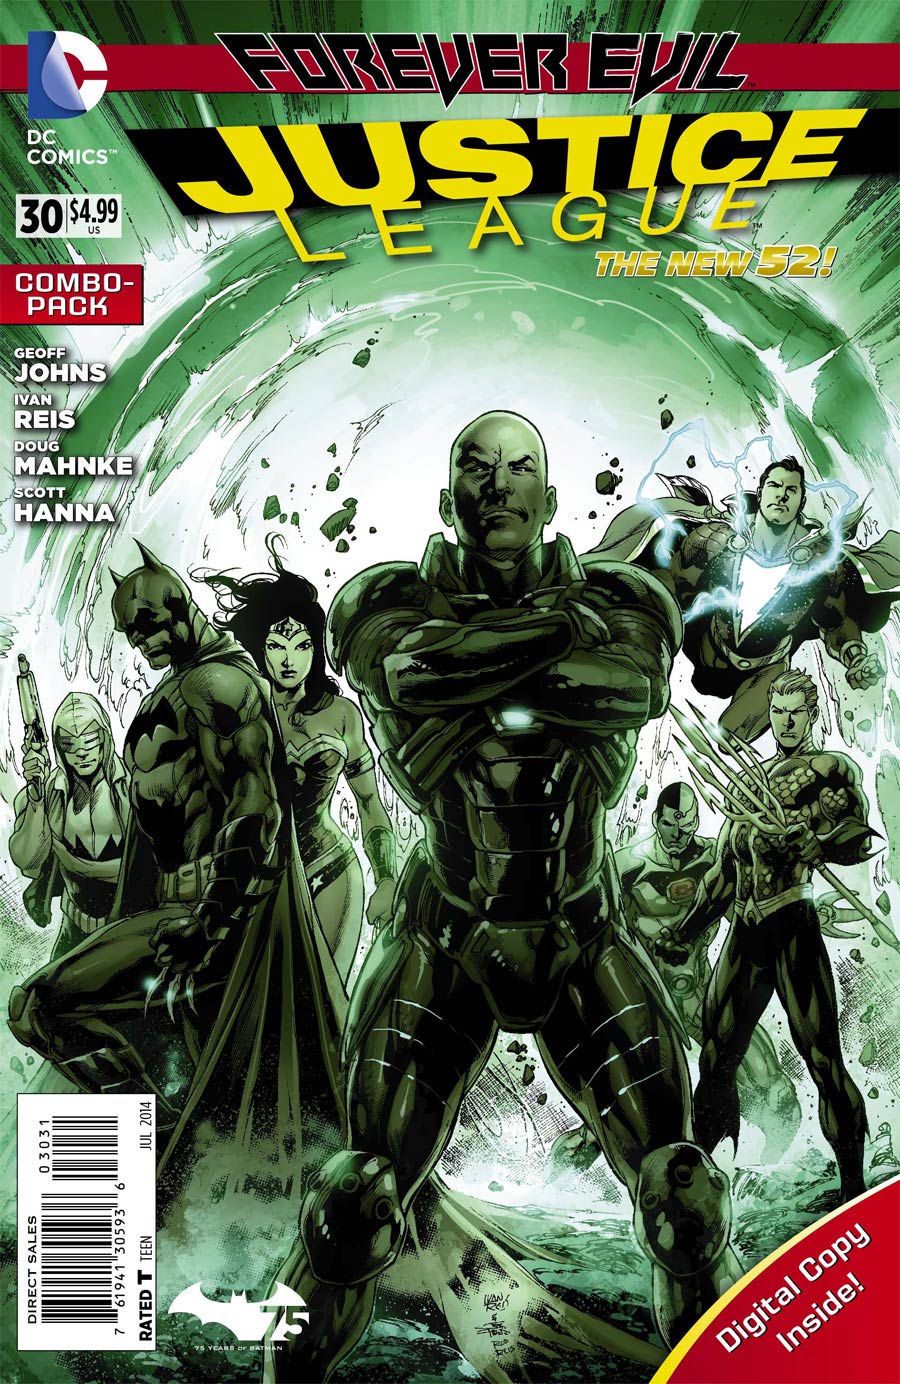 Justice League Vol 2 #30 Cover B Combo Pack With Polybag (Forever Evil Aftermath)